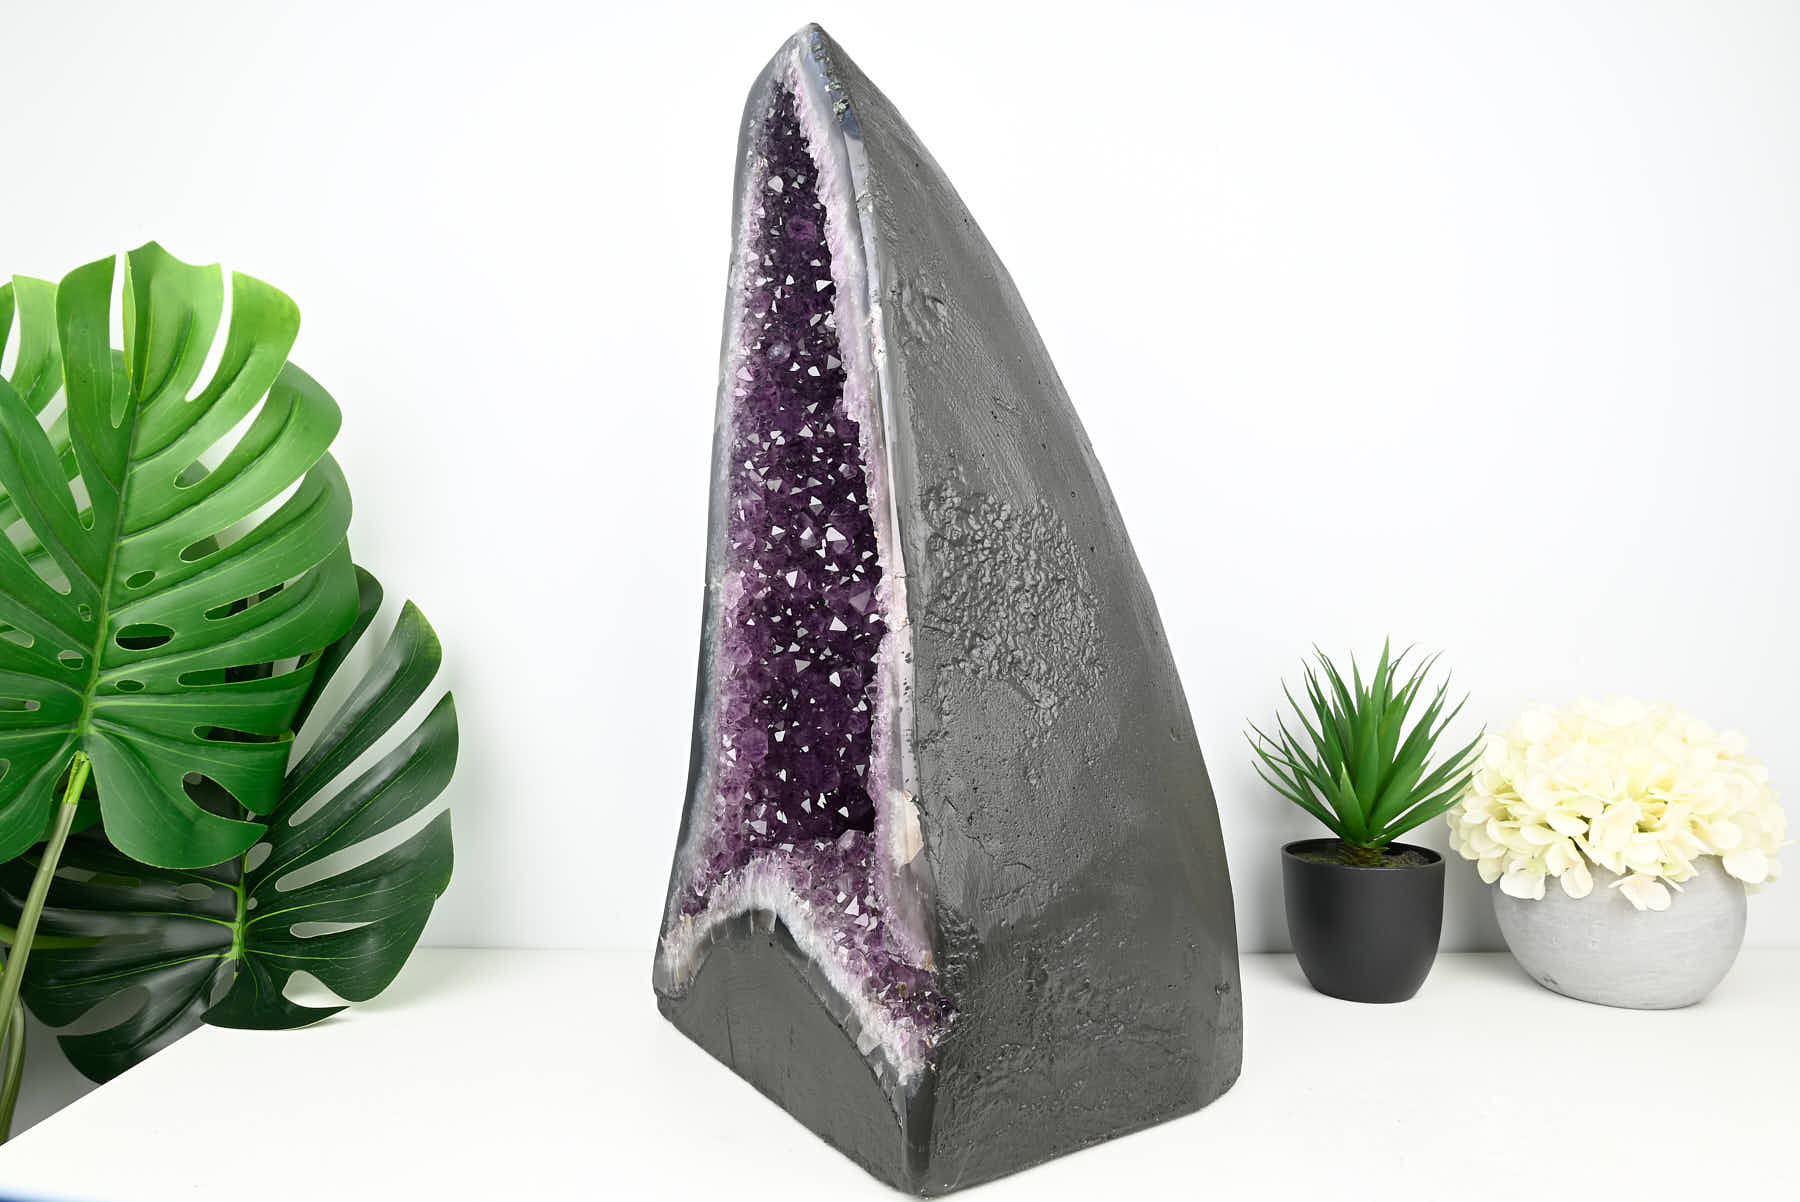 Extra Quality Amethyst Cathedral - 33.52kg, 53cm tall - #CAAMET-10042